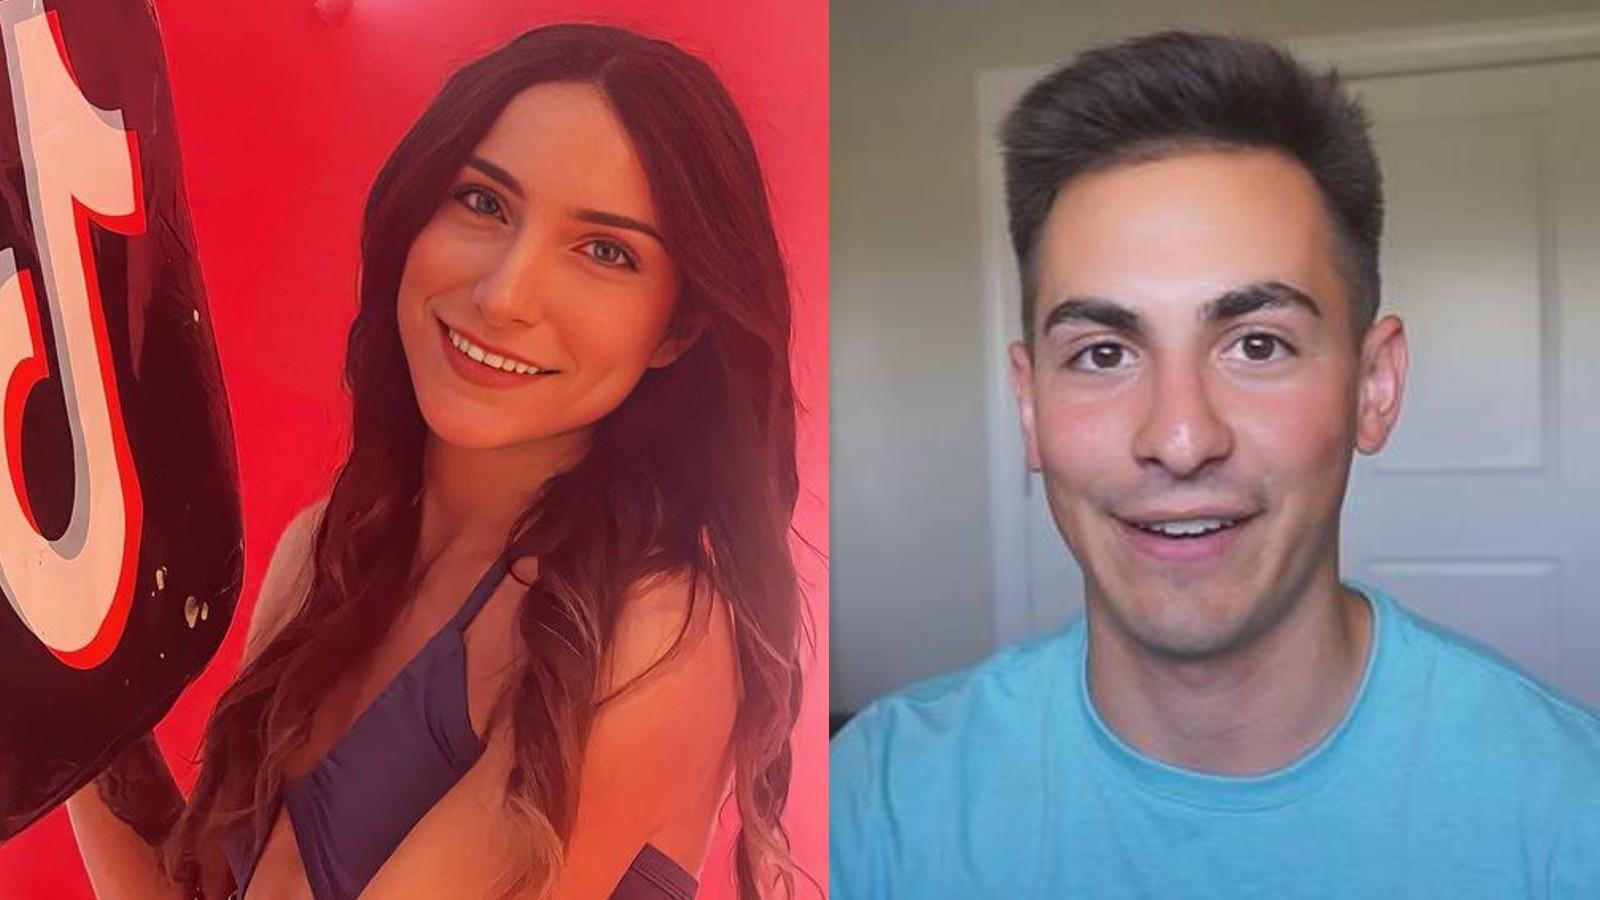 Censor and Nadia in side by side picture